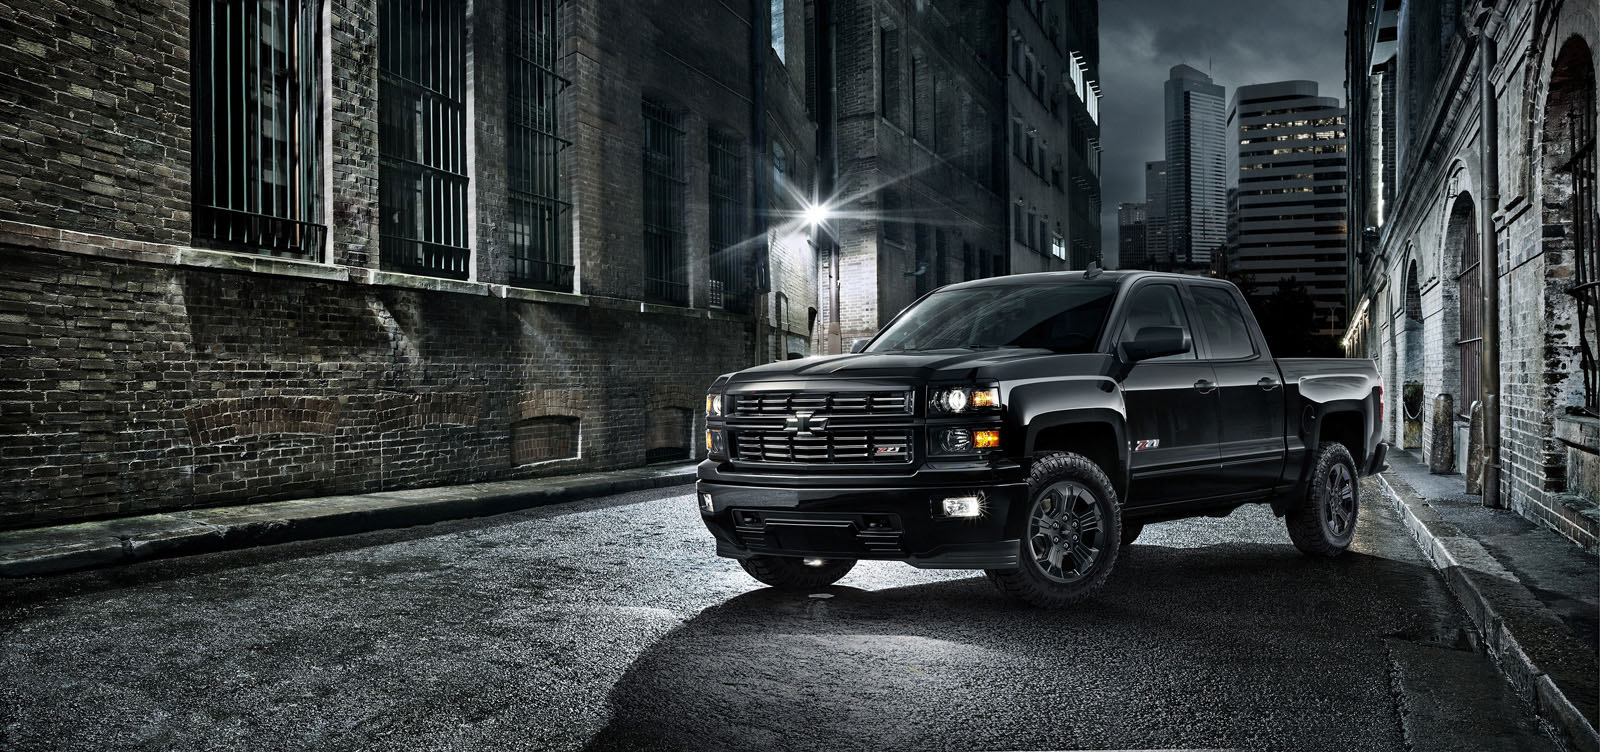 Chevrolet is taking black to the next level with the Silverado Midnight special edition, on display starting today (January 22) at the National Automobile Dealers Association Convention & Expo in San Francisco, and making its public debut February 14 at the Chicago Auto Show.